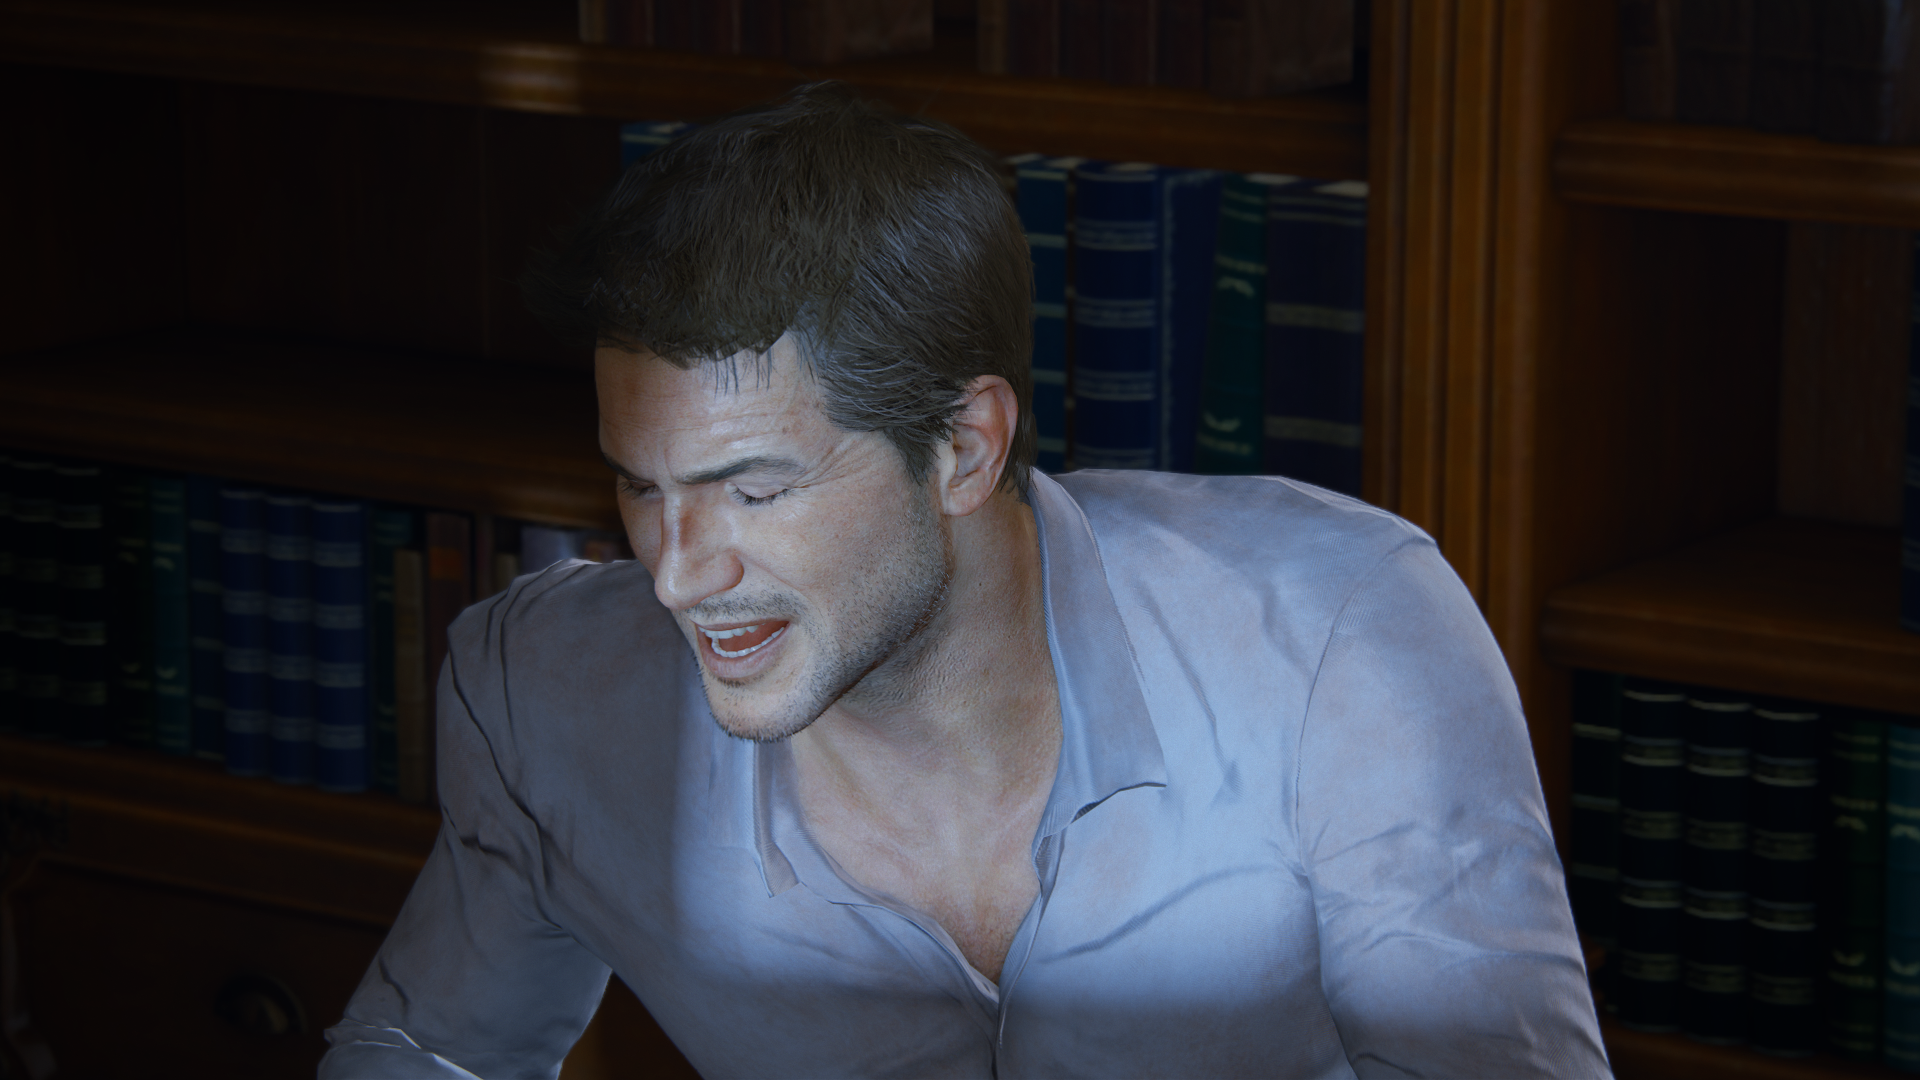 uncharted4_athiefsendskjc0.png